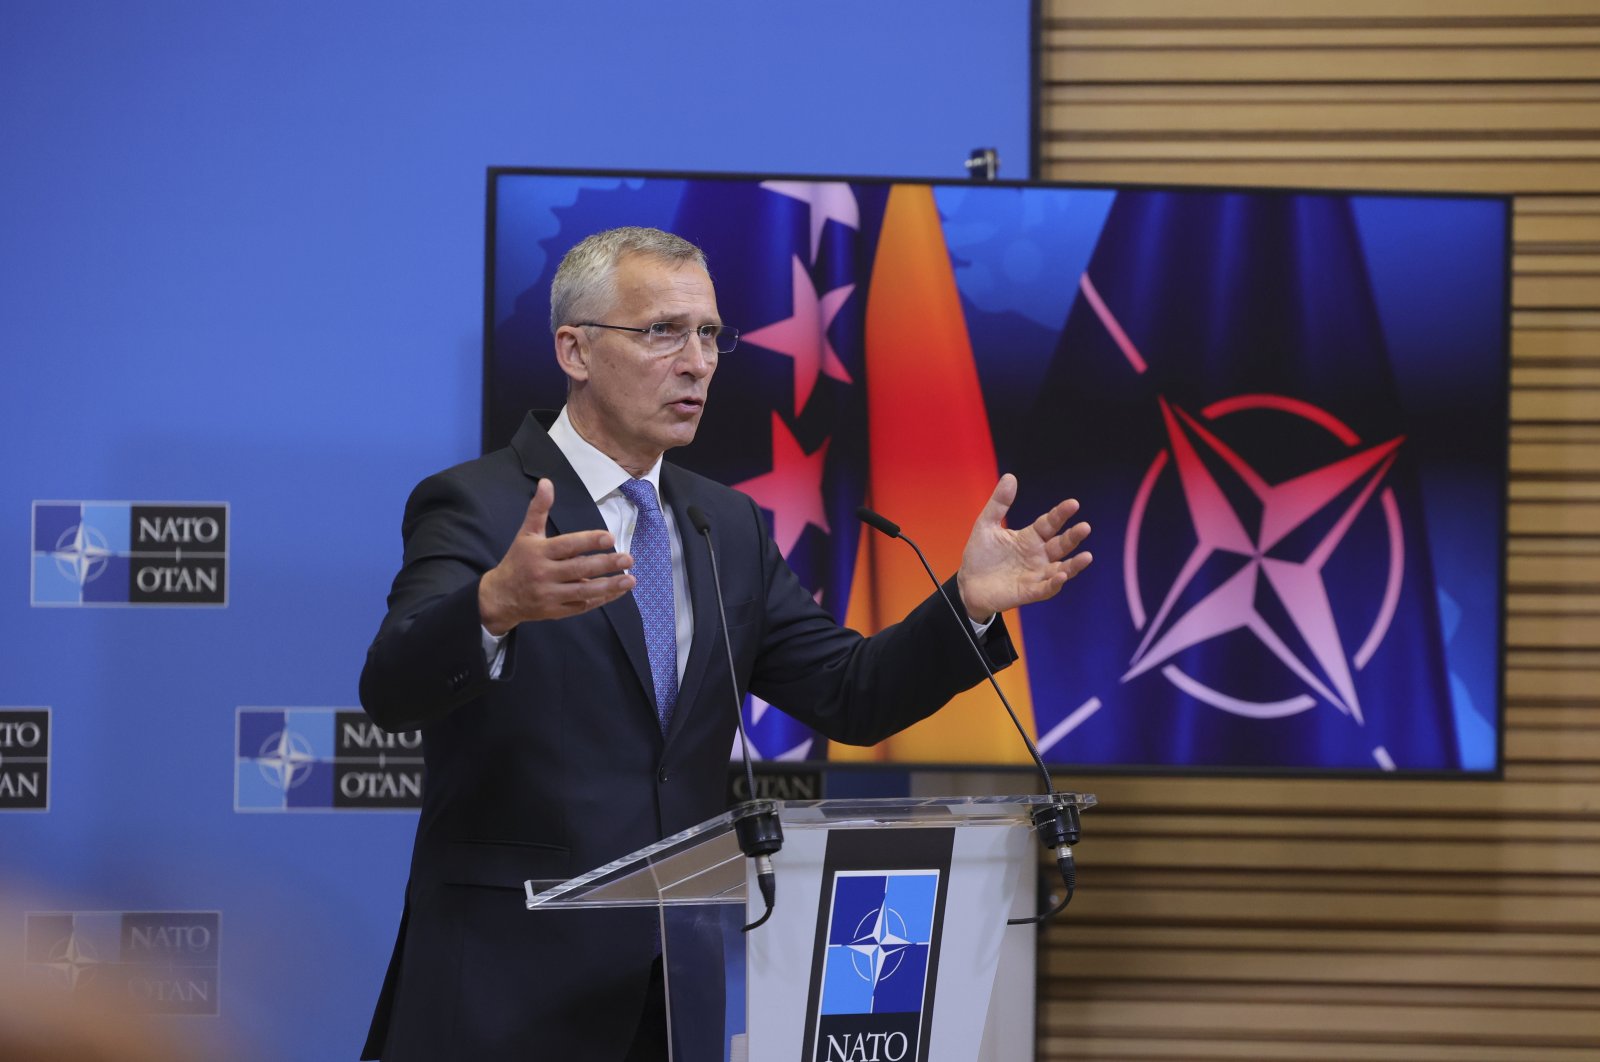 NATO Secretary-General Jens Stoltenberg speaks during a media conference at NATO headquarters in Brussels, May 25, 2022. (AP Photo)